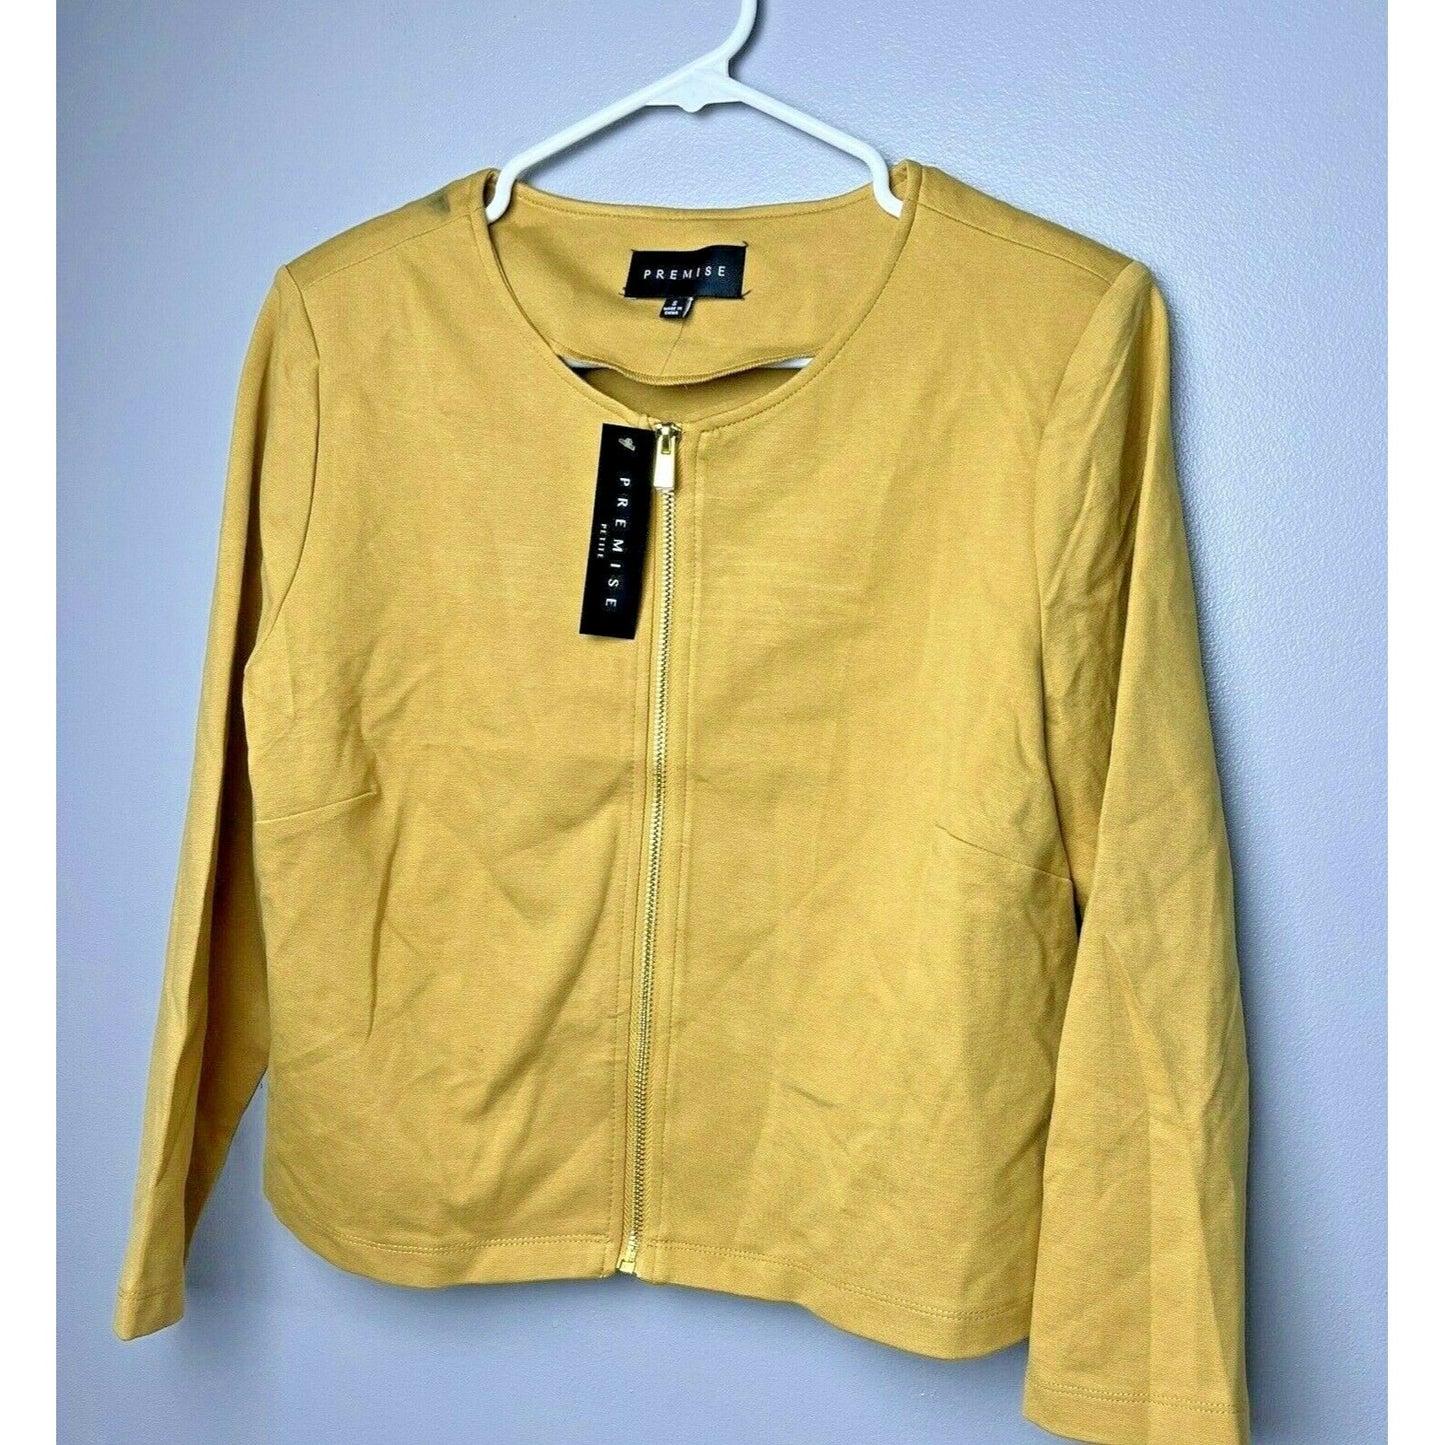 Premise Zip Front Ponte Jacket French Gold Size Small